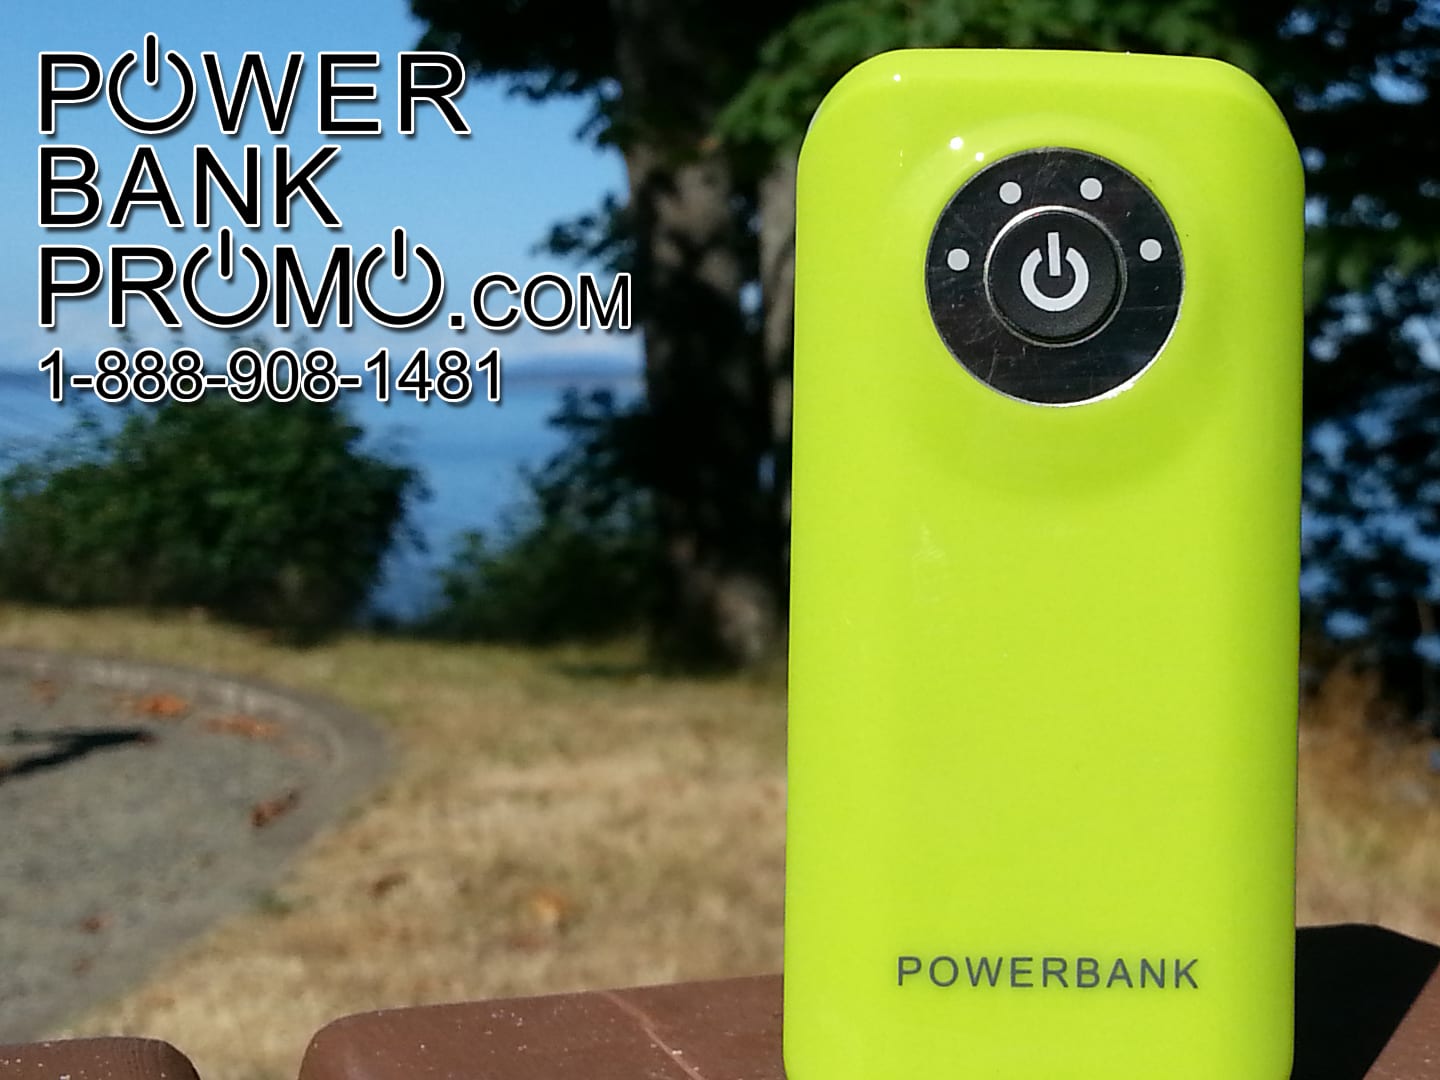 Power Bank Goes Green